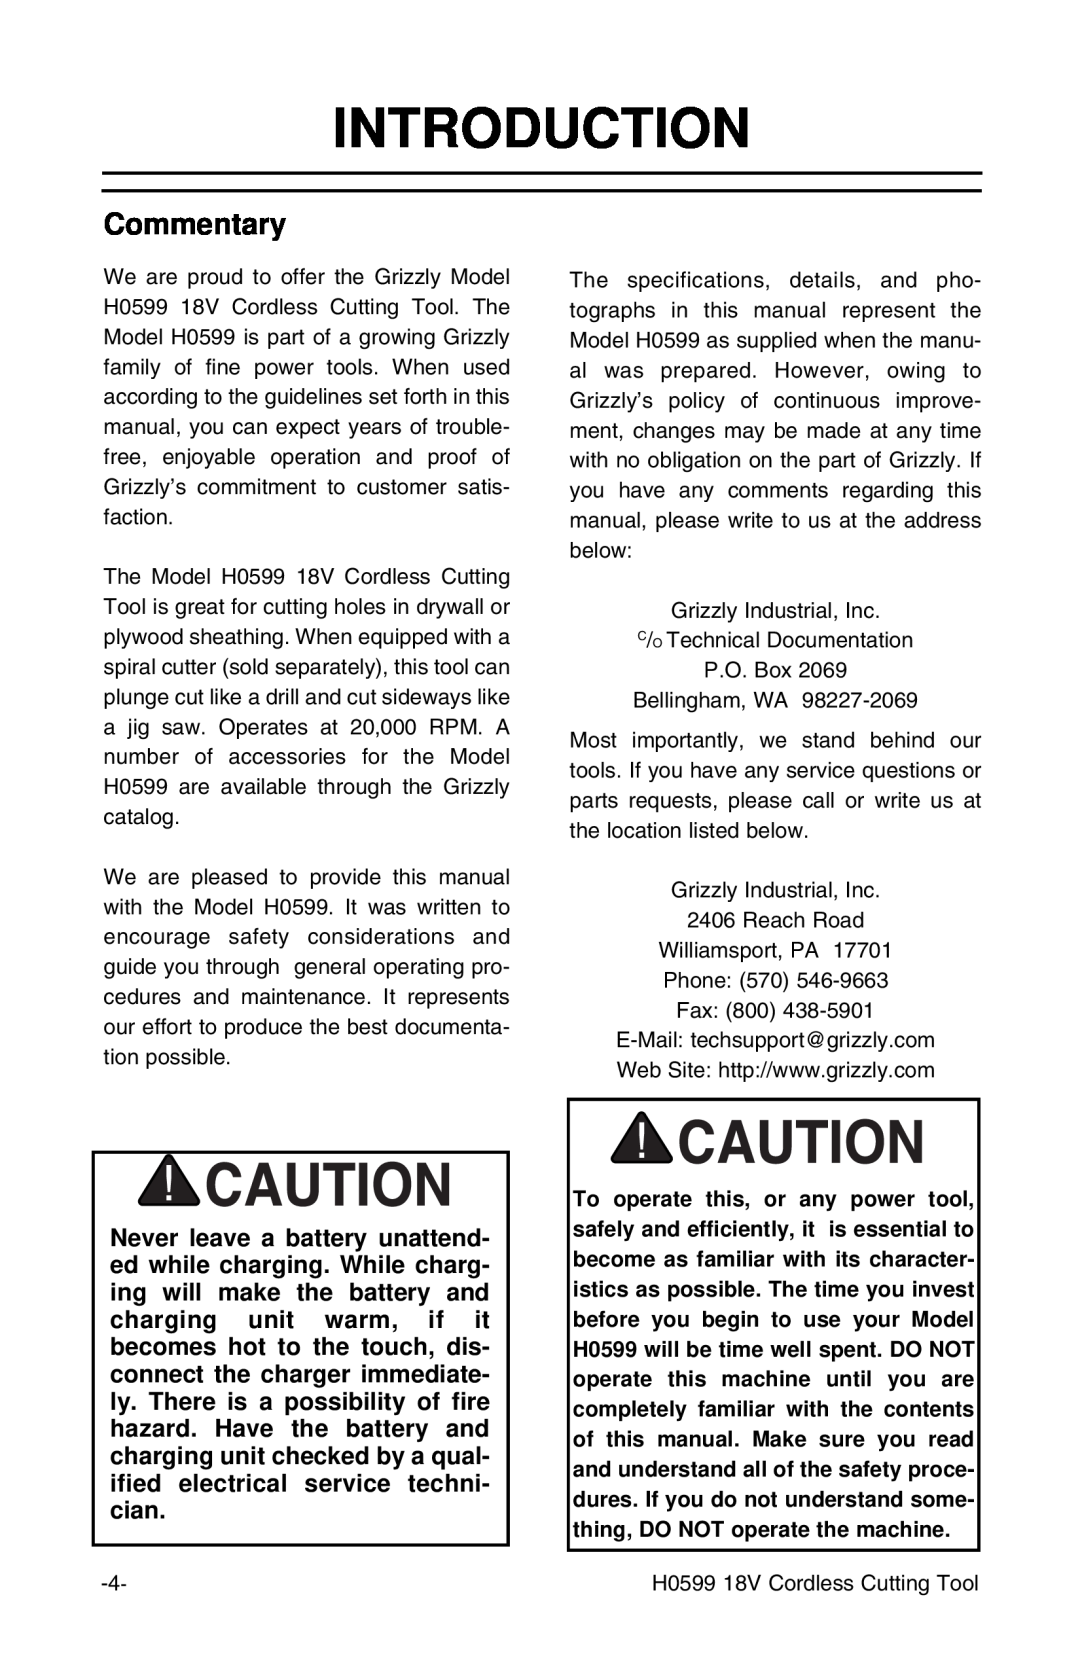 Grizzly H0599 instruction manual Introduction, Commentary 